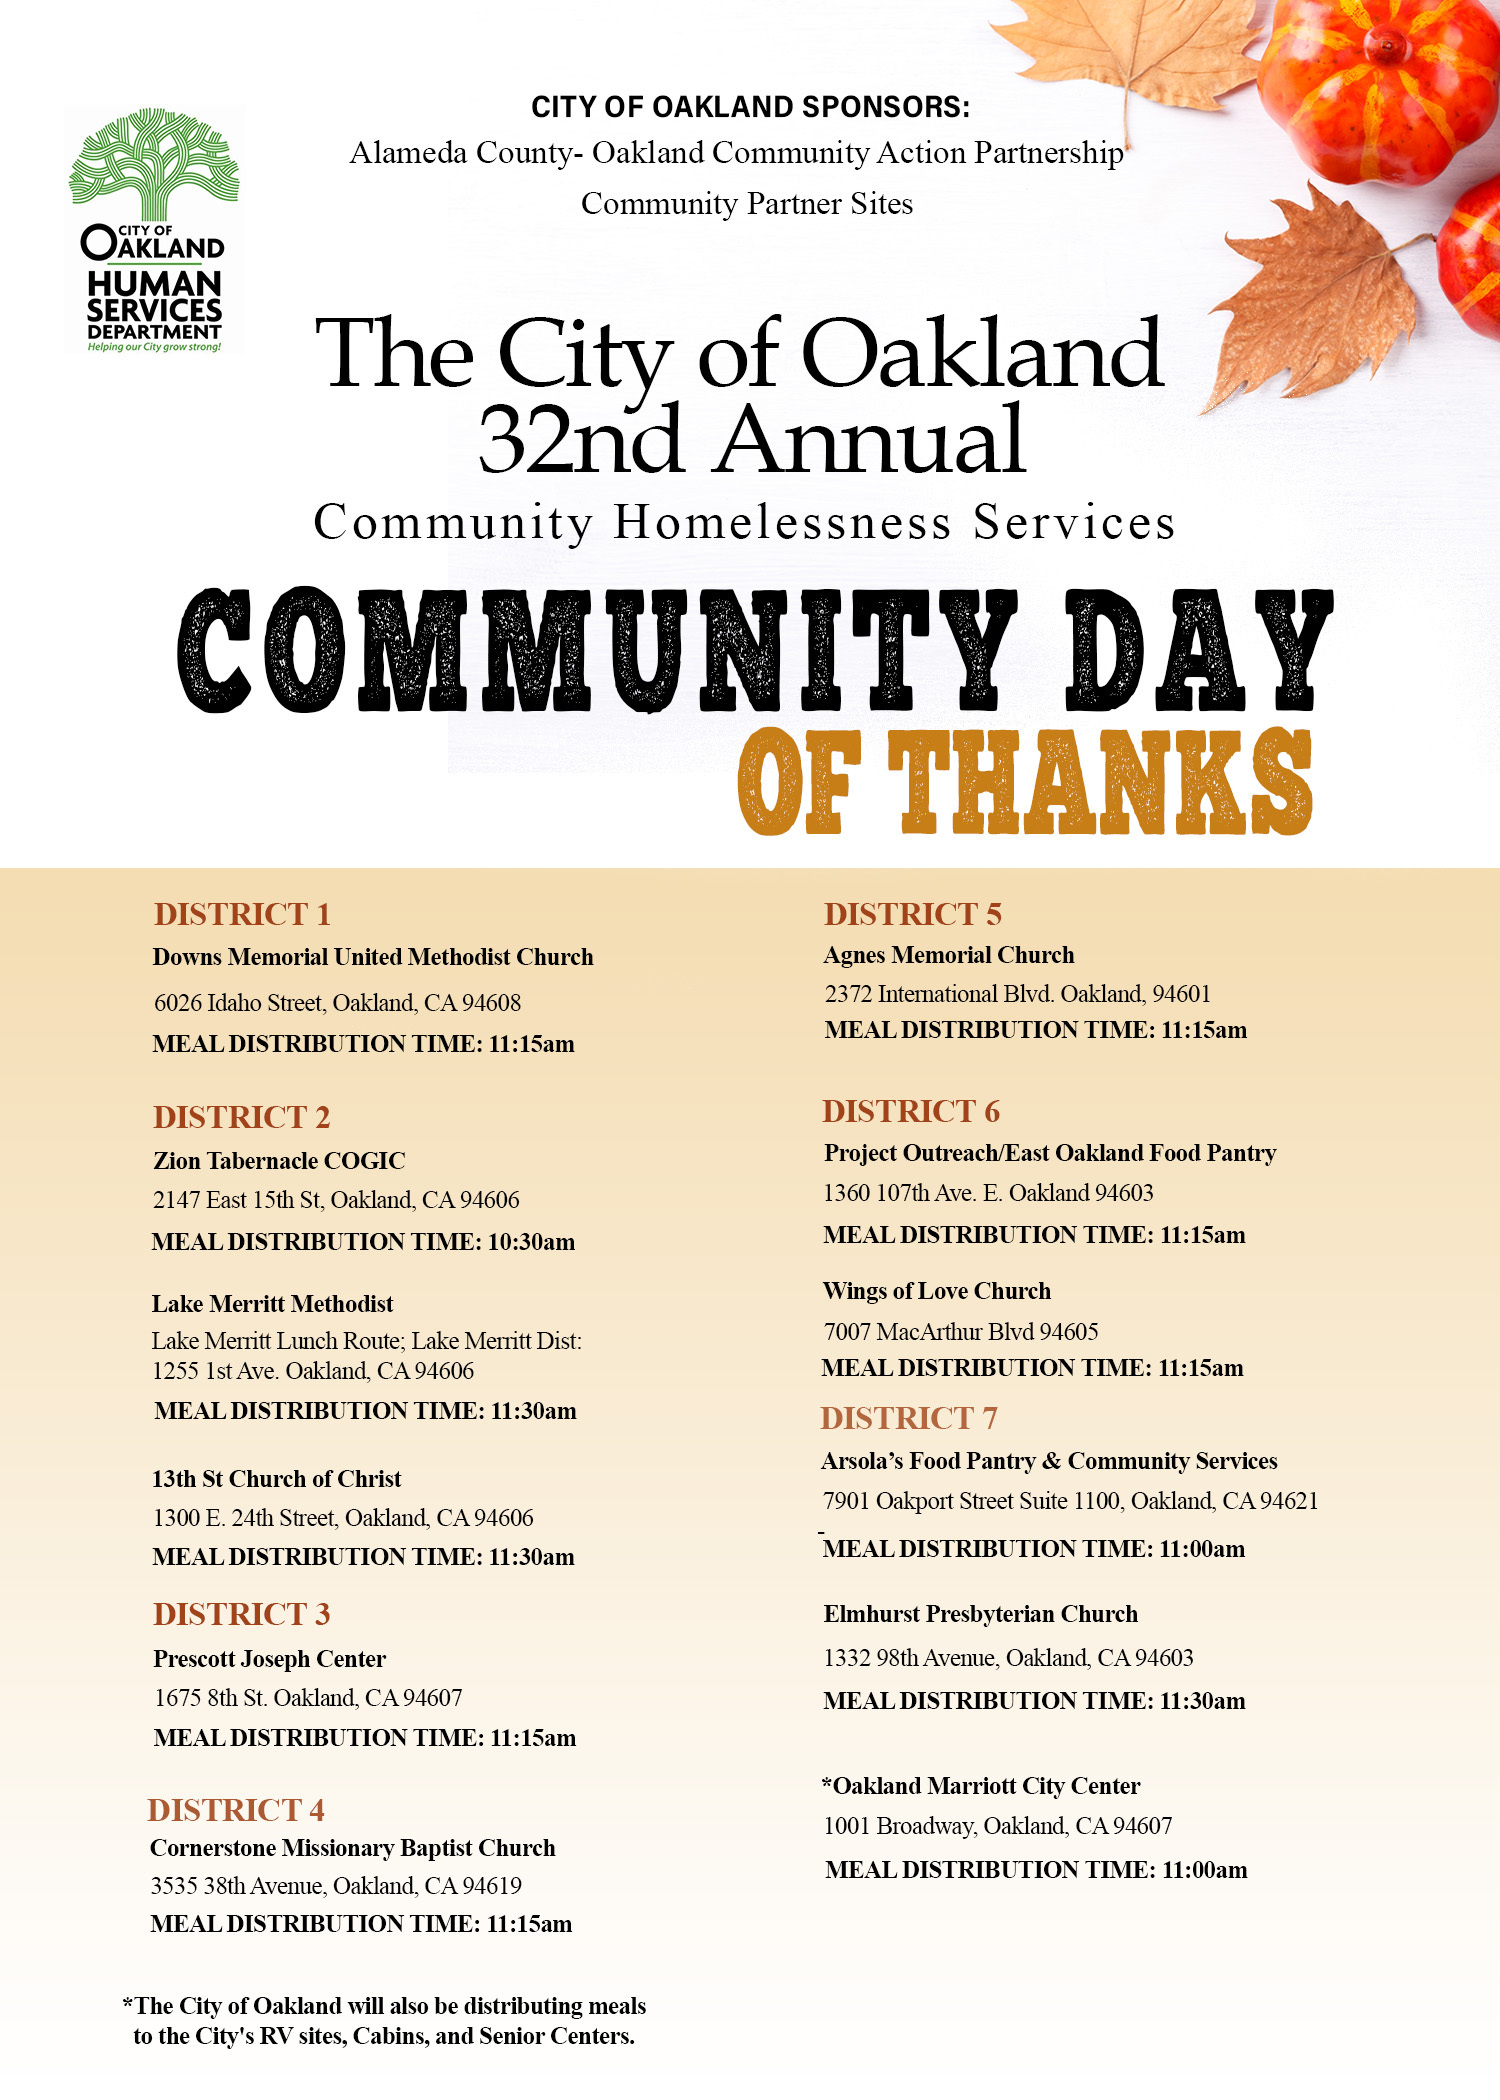 Flyer describing where the Community Day of Thanks Meals will be distributed in addition to the Marriott